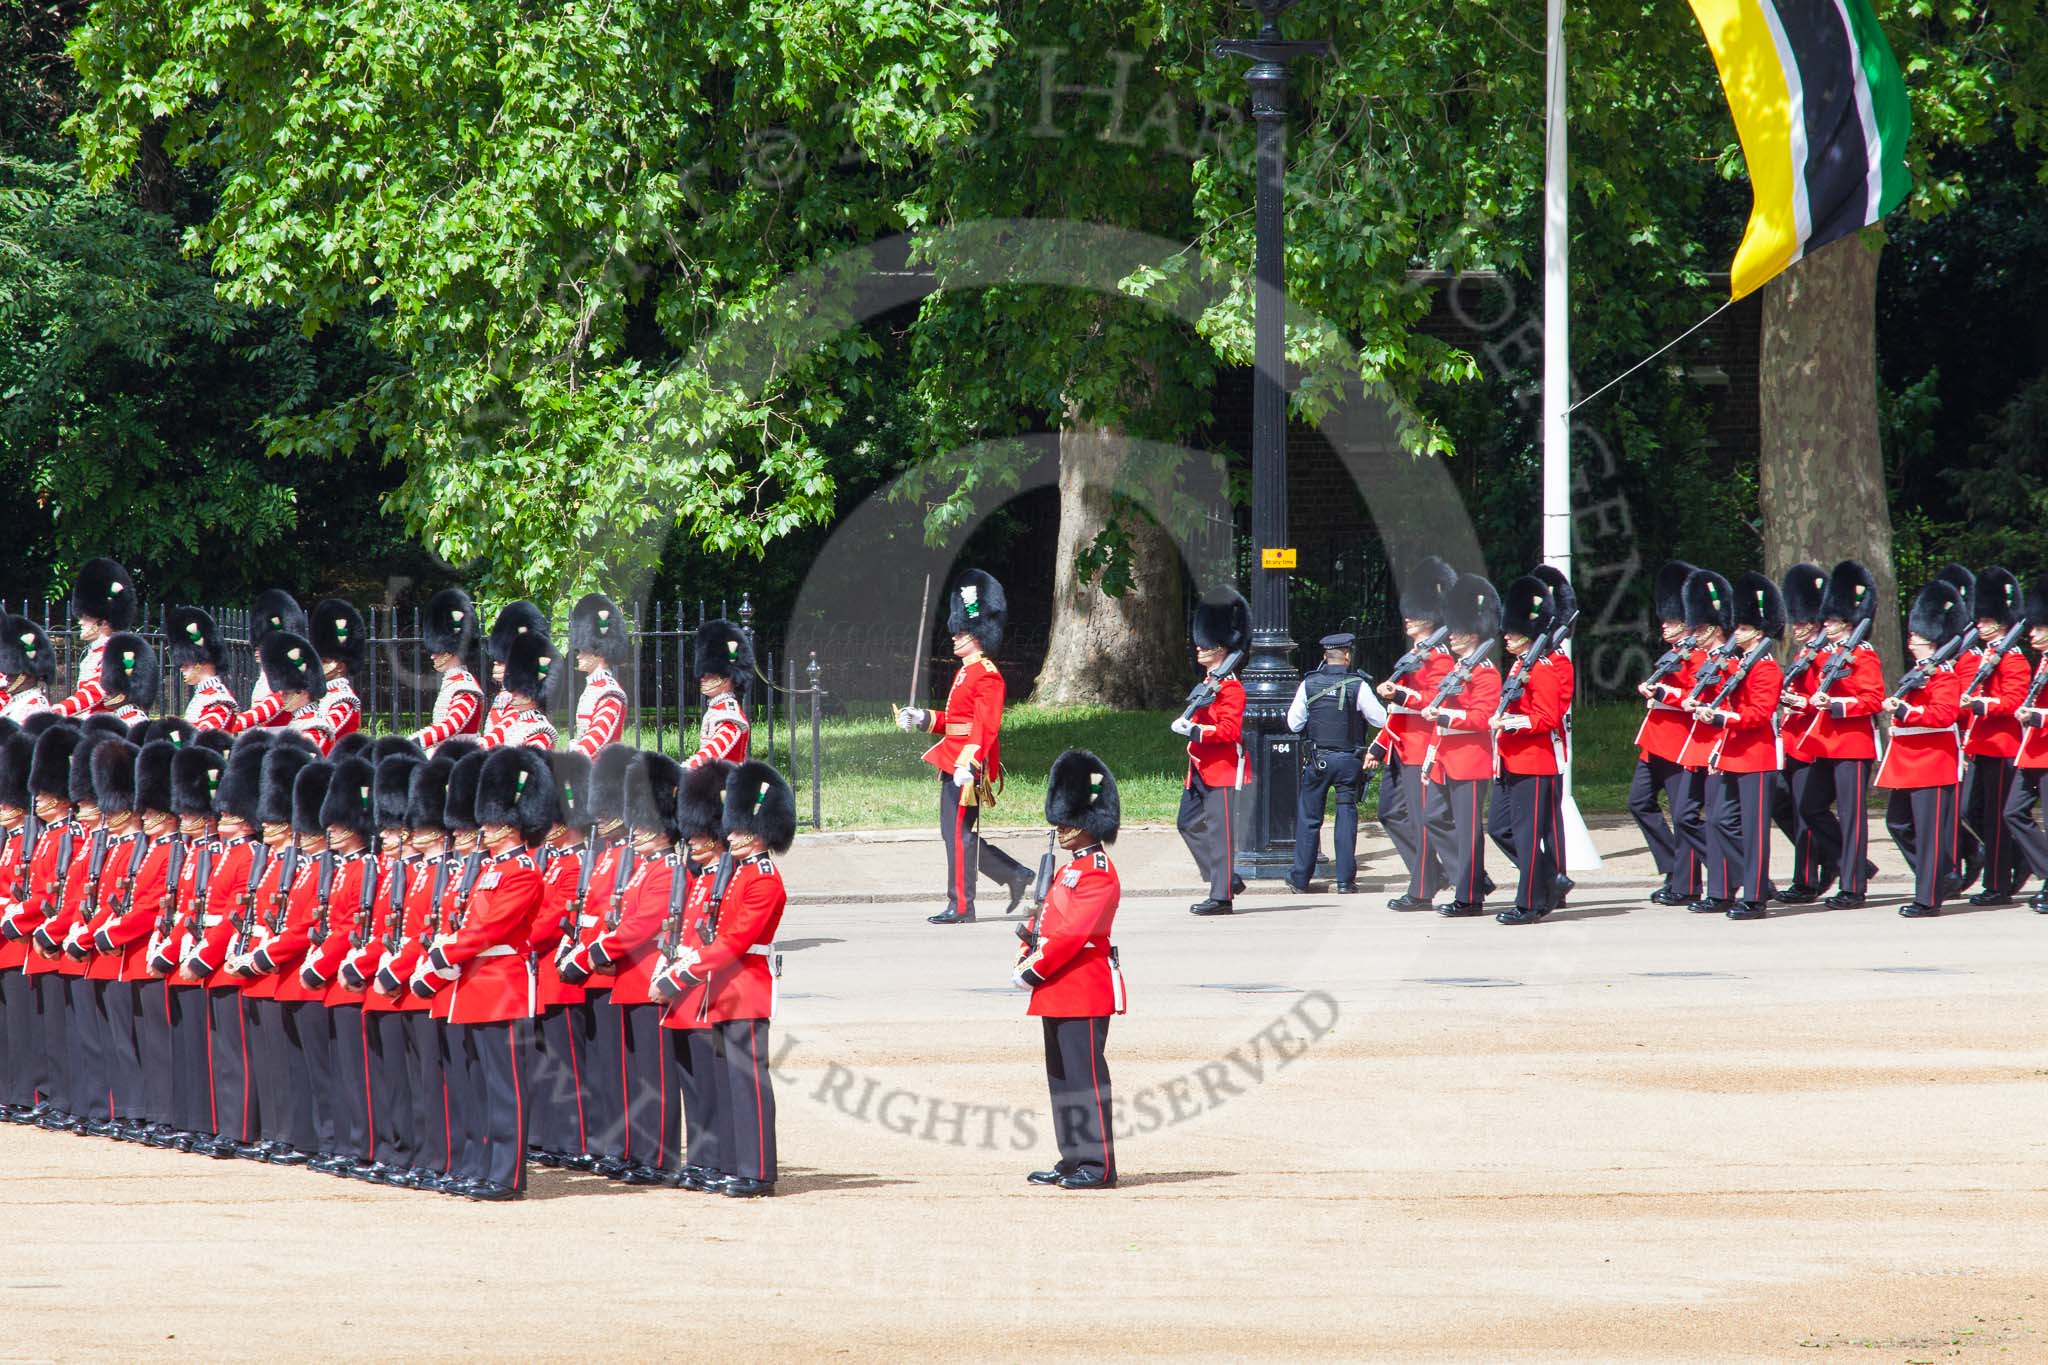 Trooping the Colour 2013: The Band of the Welsh Guards is marching along the St James's Park side of Horse Guards parade, here passing No. 3 Guard, , 1st Battalion Welsh Guards. The musicians are followed by No. 2 Guard, , 1st Battalion Welsh Guards. Image #105, 15 June 2013 10:30 Horse Guards Parade, London, UK